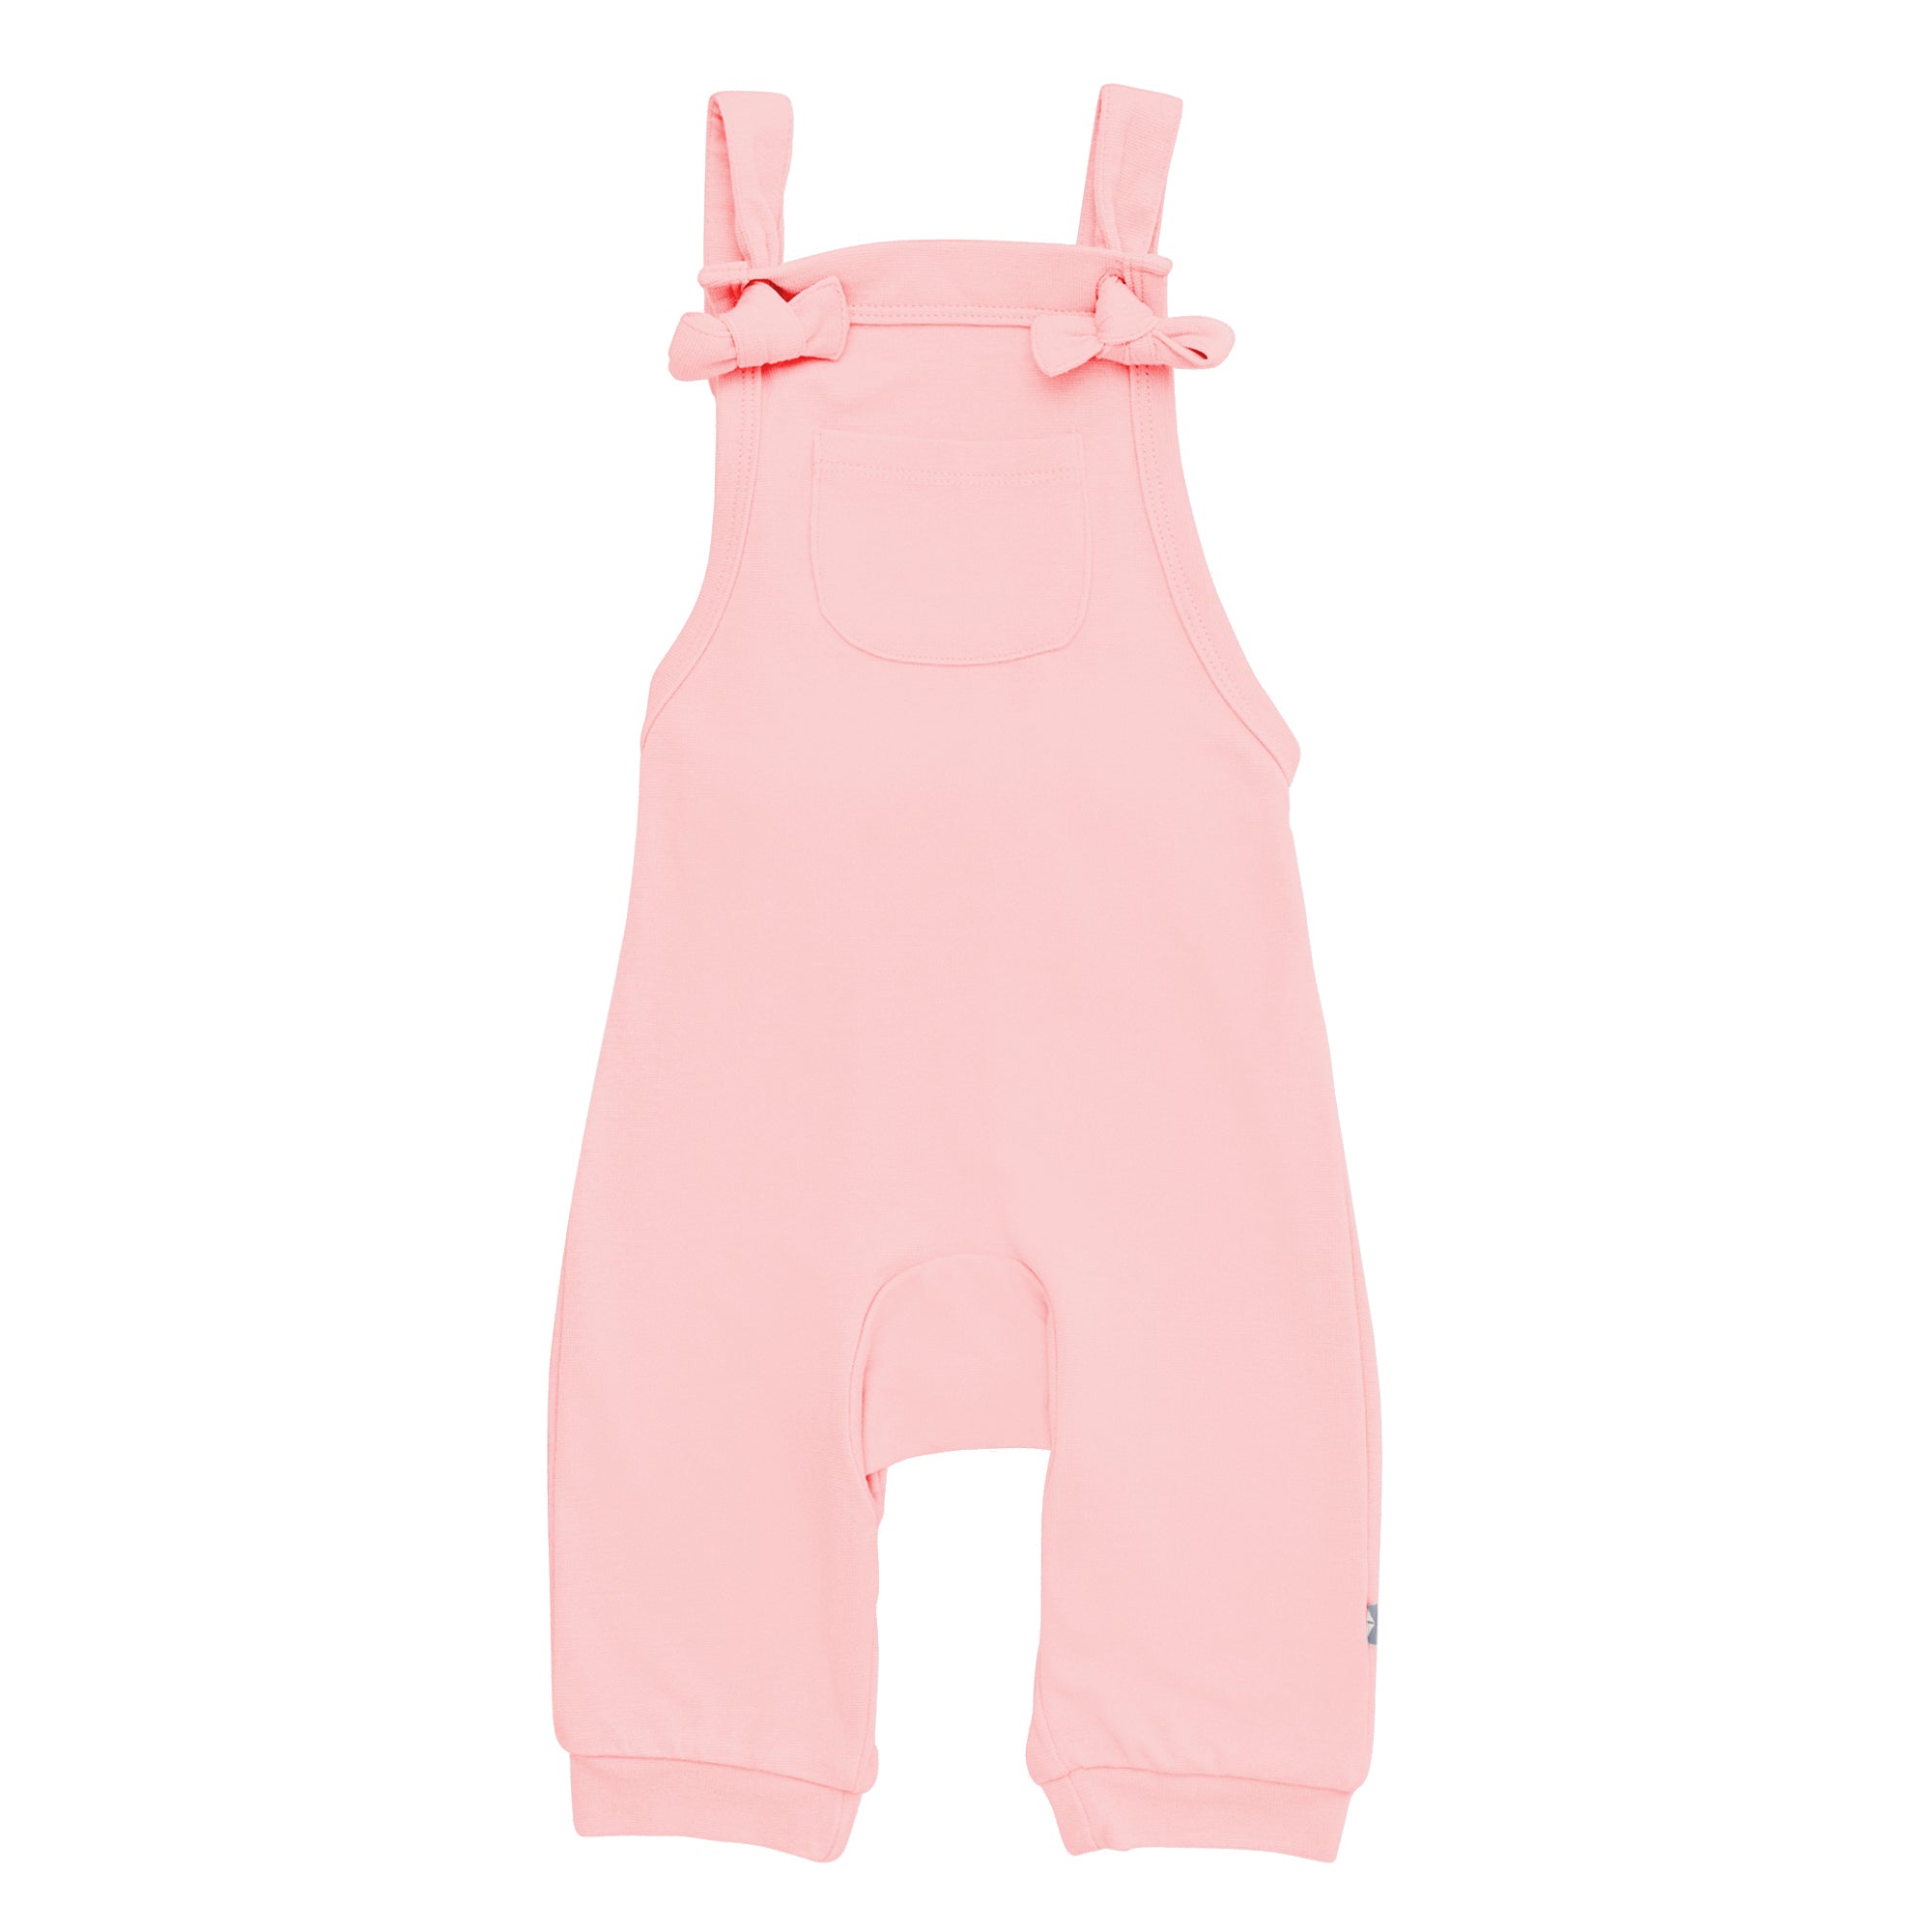 Kyte BABY Baby Overall Bamboo Jersey Overall in Crepe